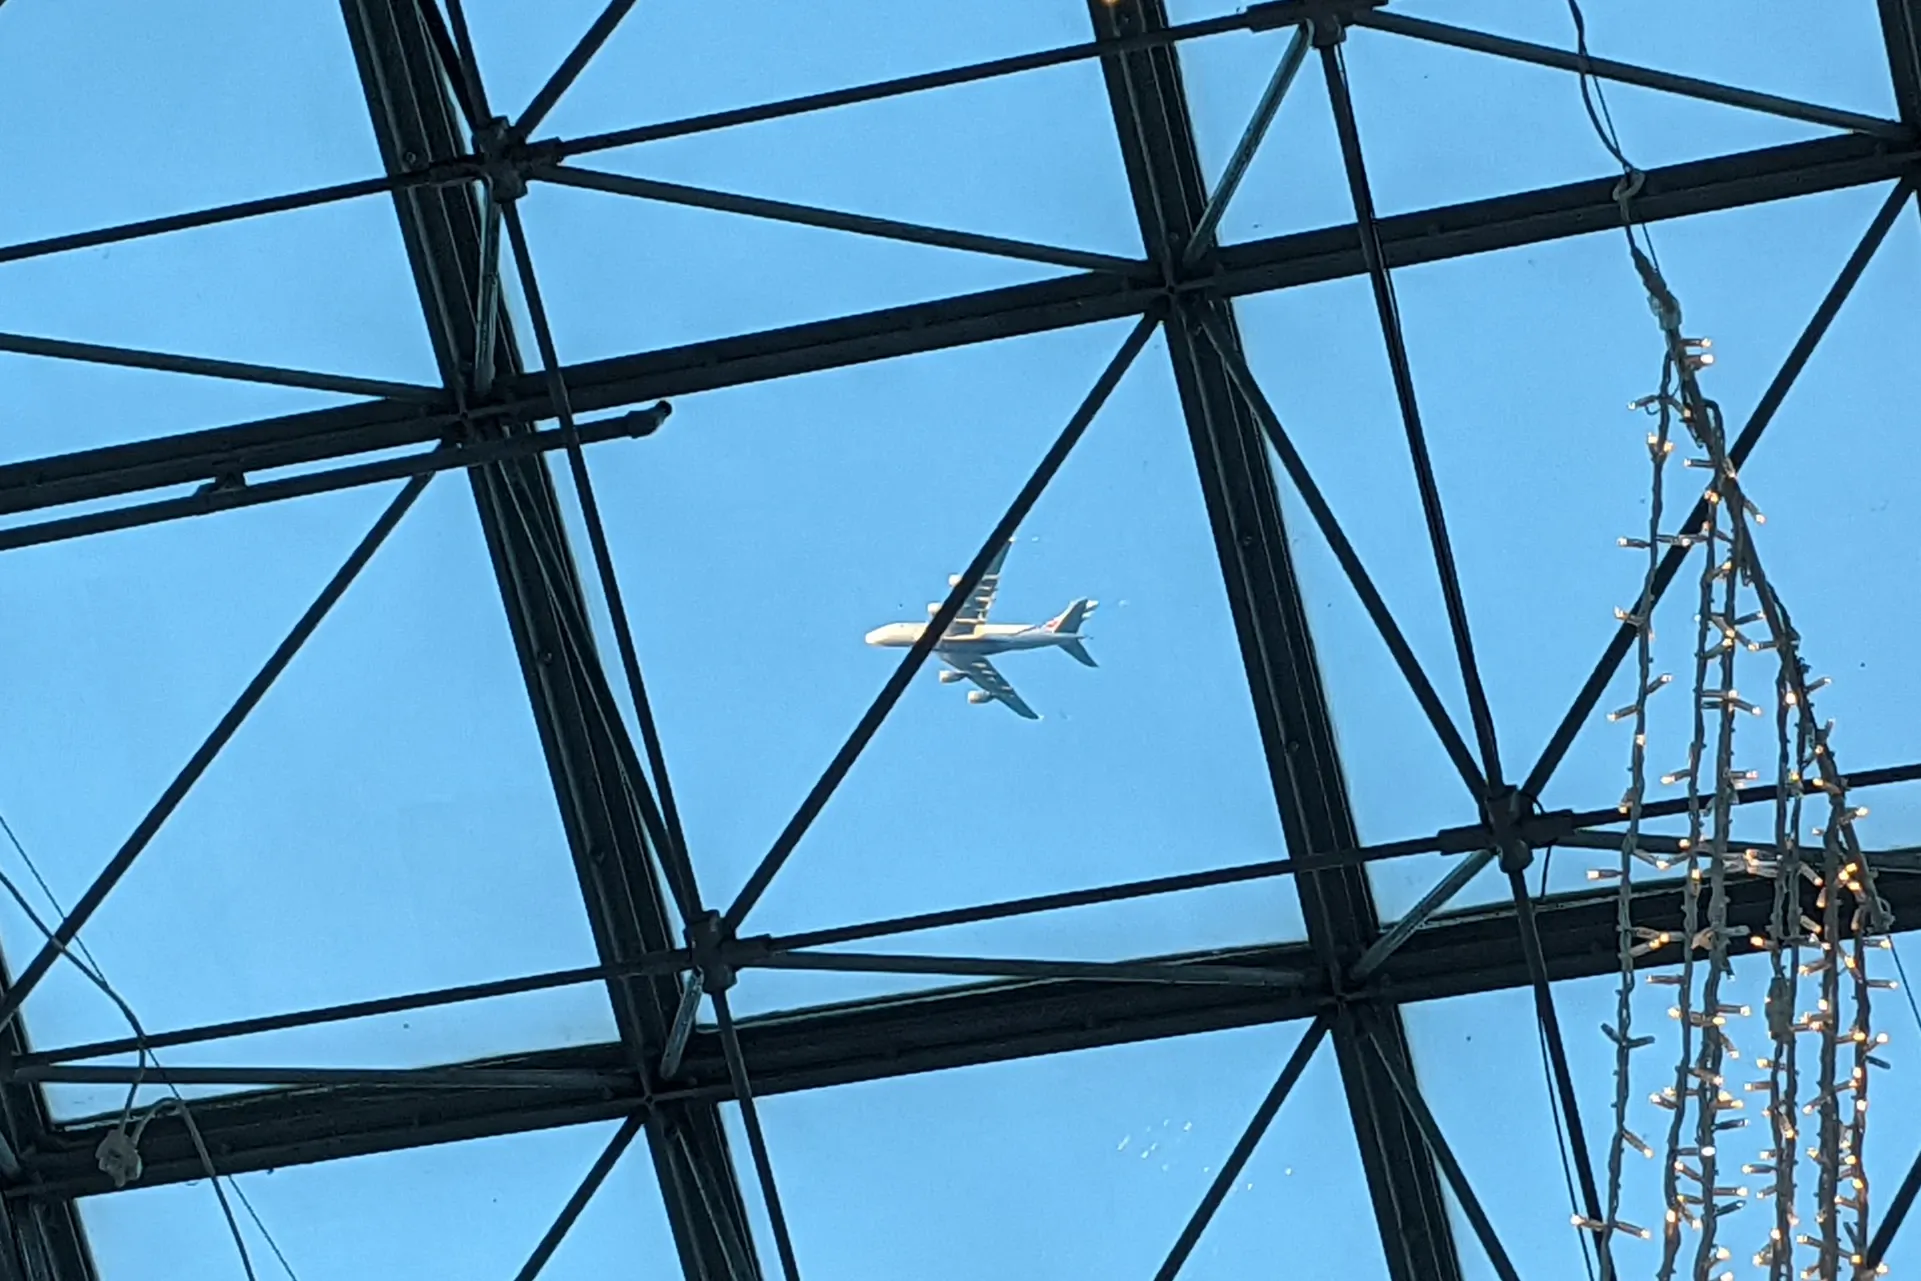 A plane flies directly above, at low altitude, seen through a skylight
window of Surrey Quays Shopping Centre.